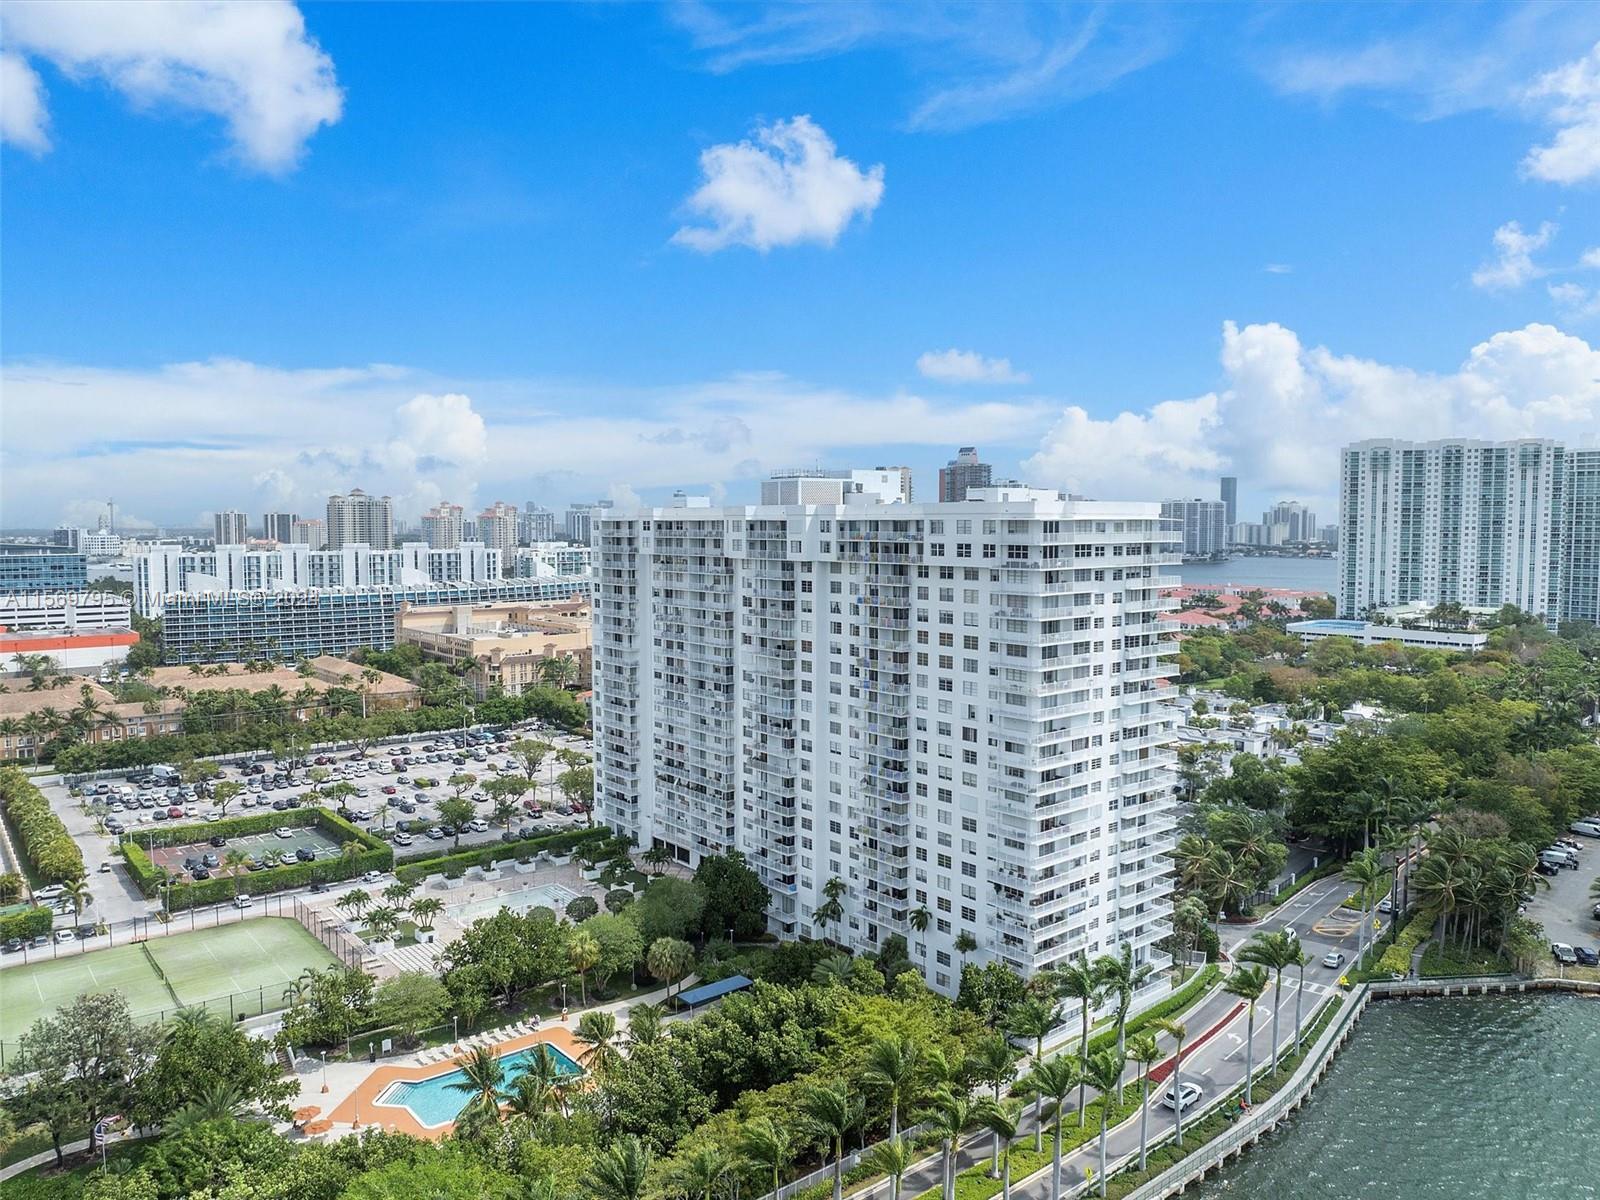 Stunning and contemporary condominium situated in an ideal location near Williams Island. This 2-bed